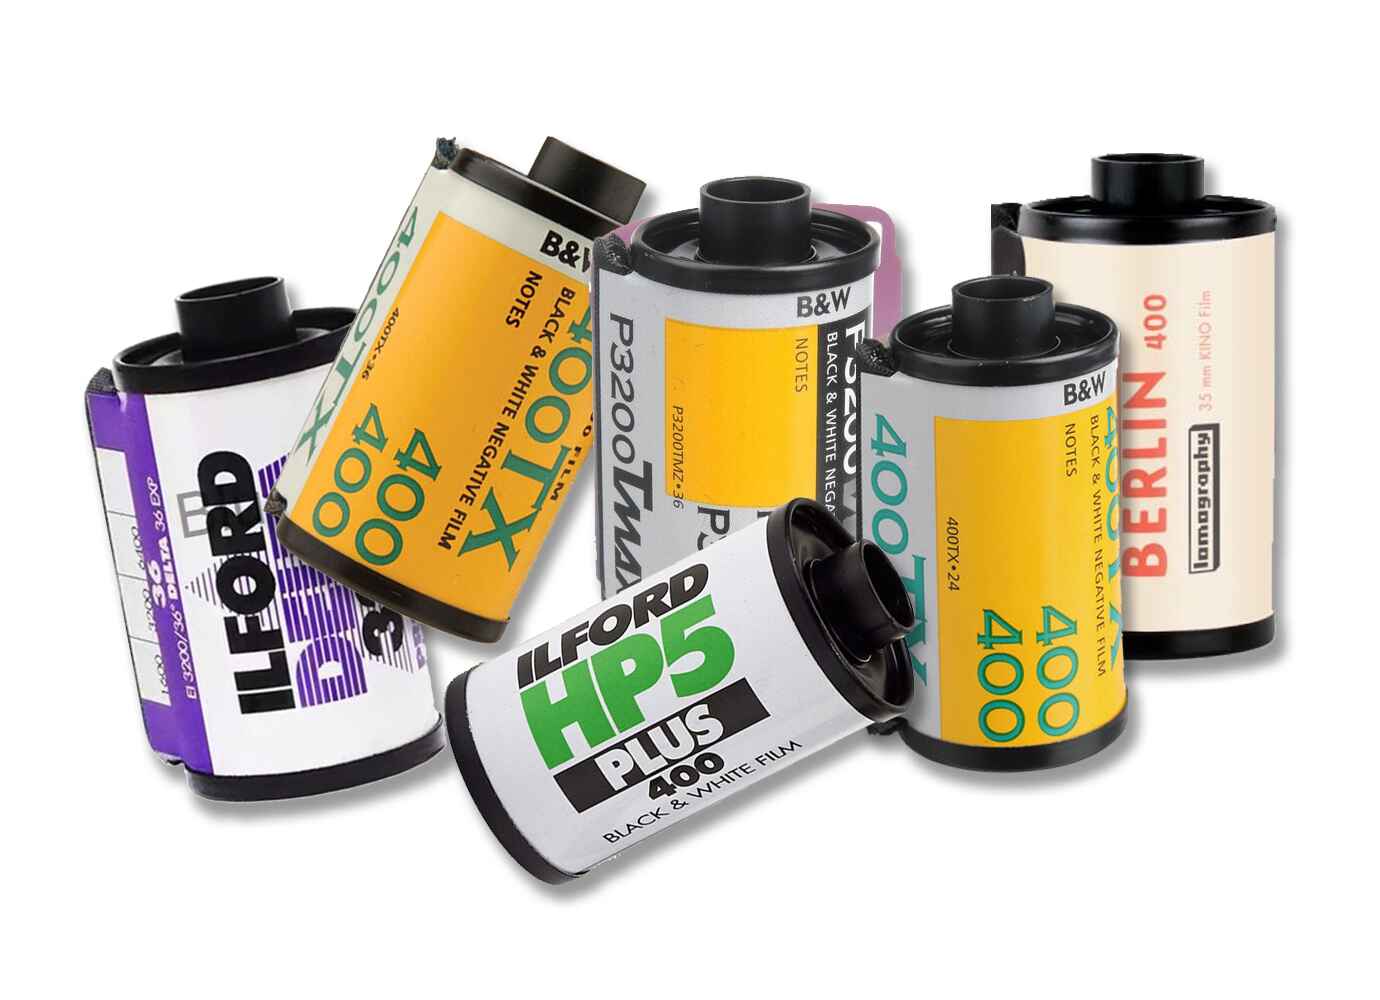 Black and white film developing.